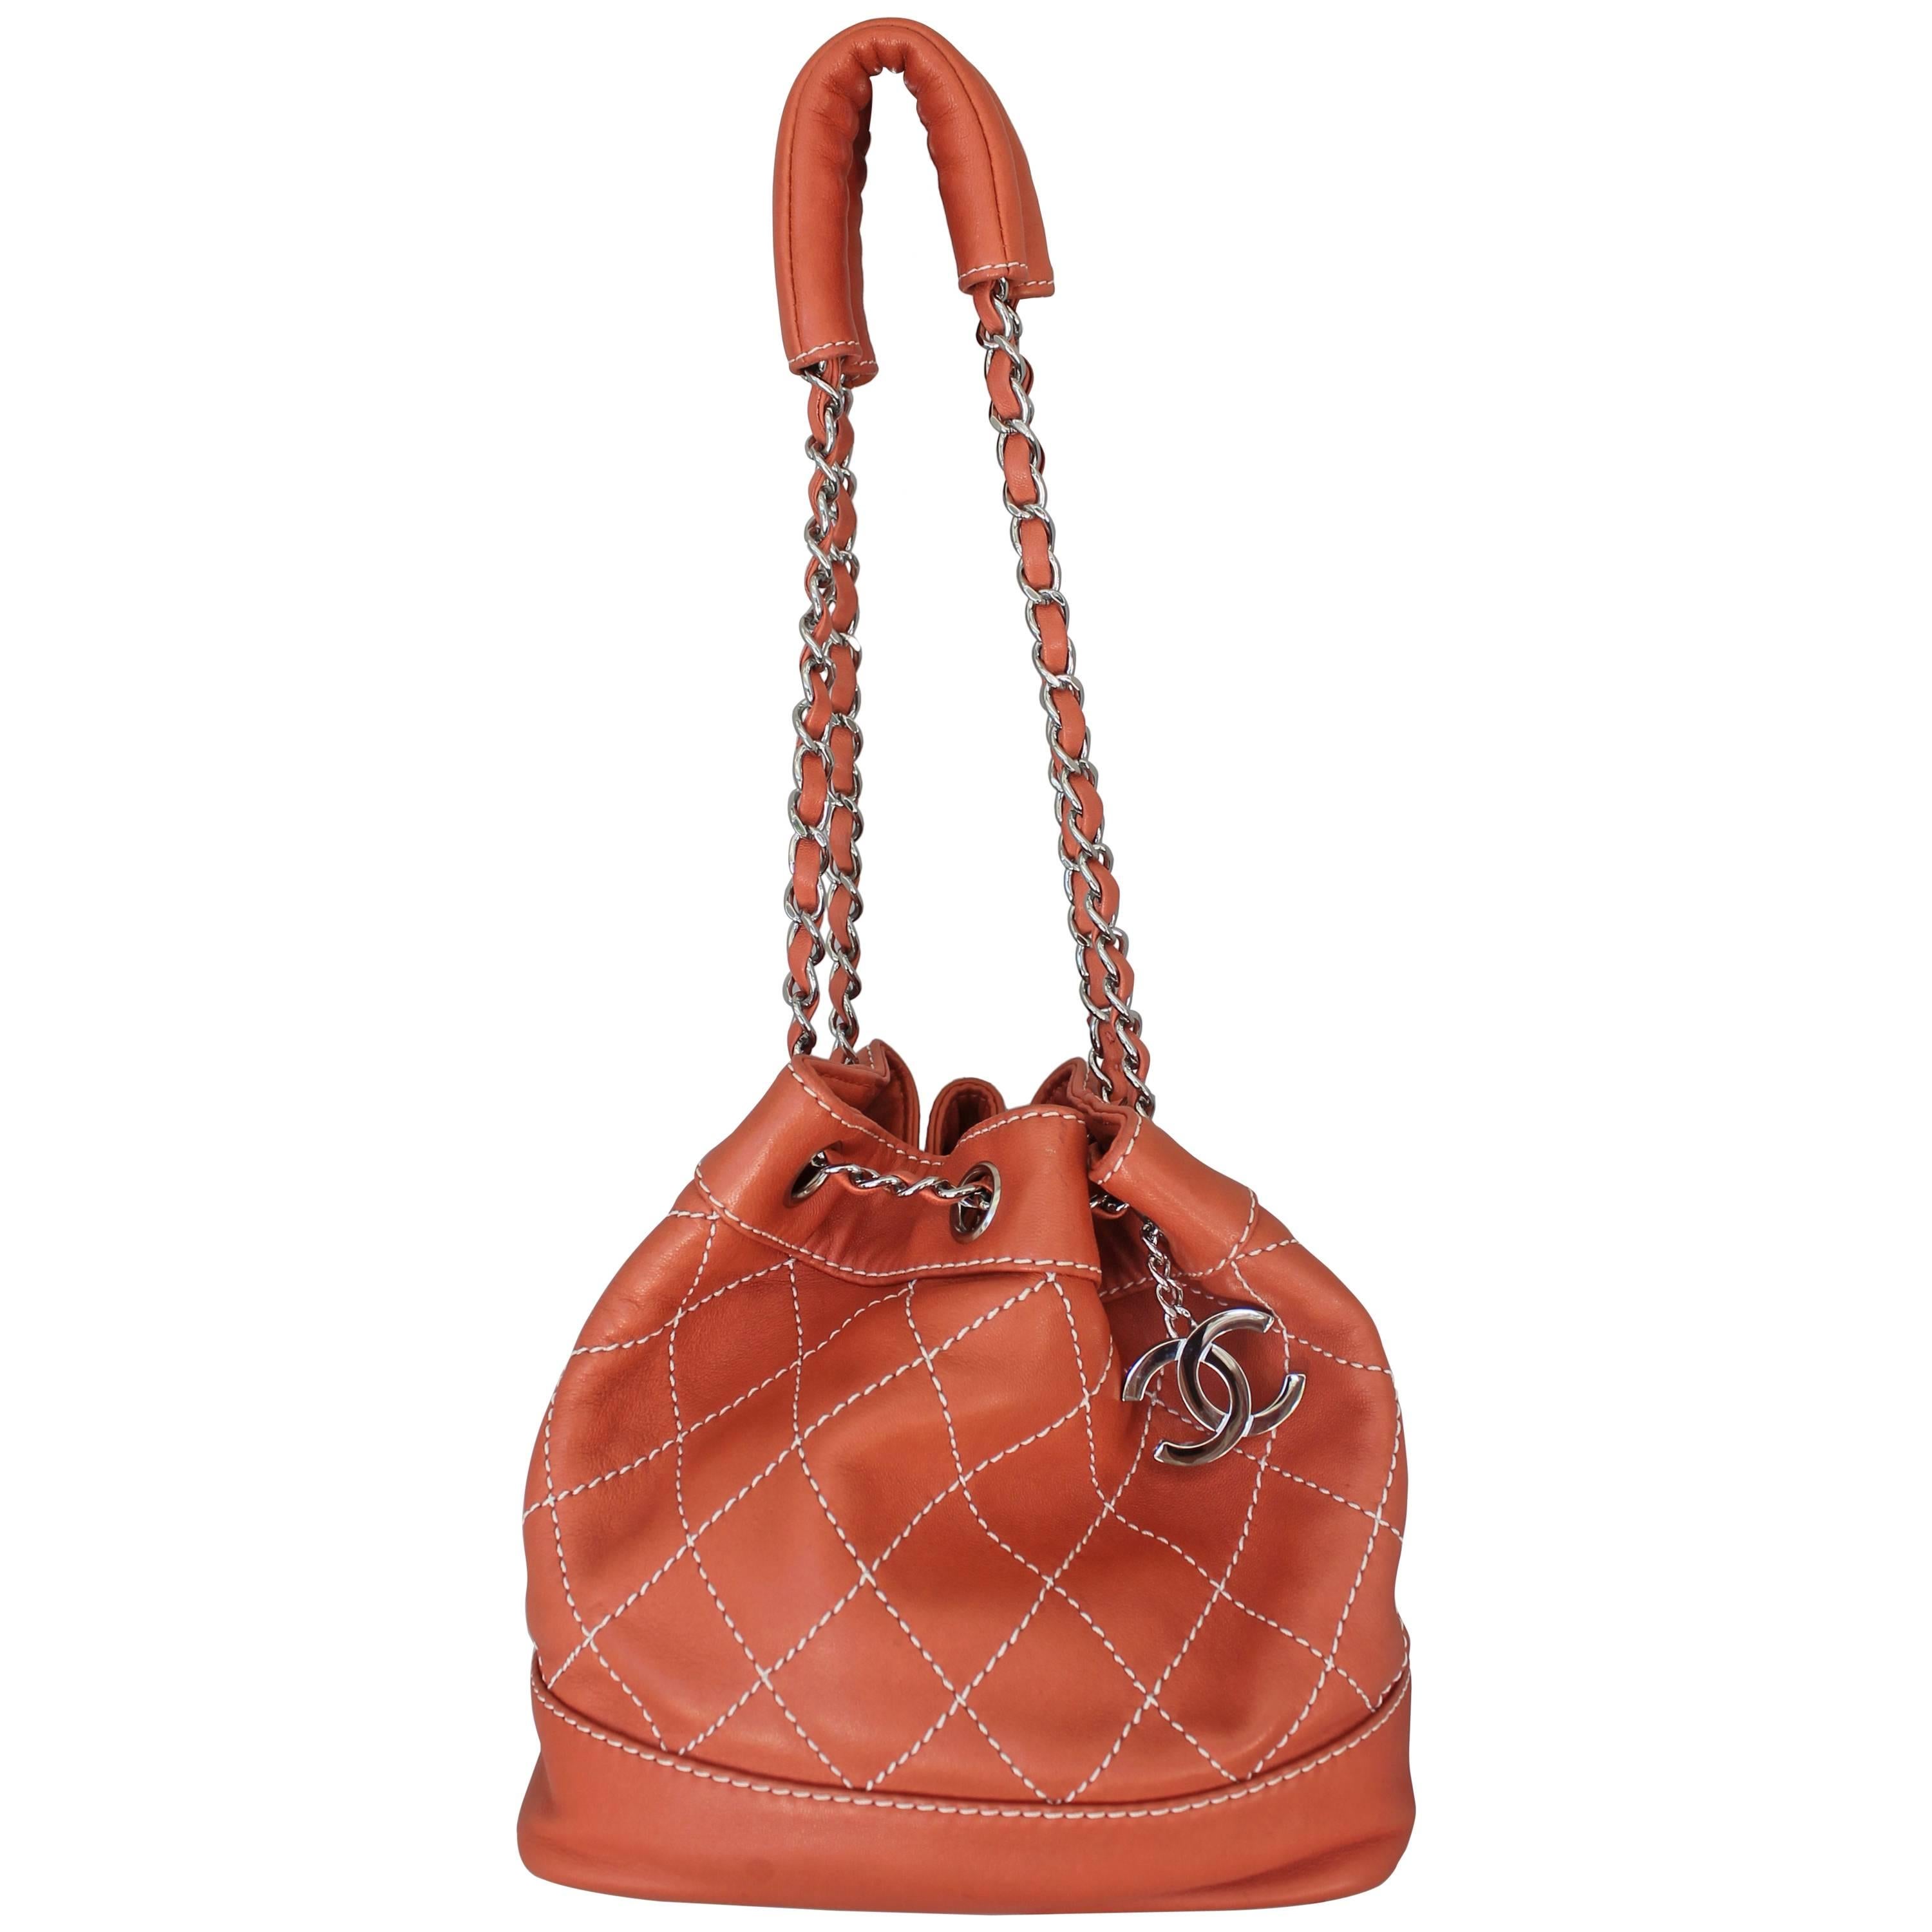 Chanel Coral Quilted Lambskin Bucket Bag - SHW - circa 2006